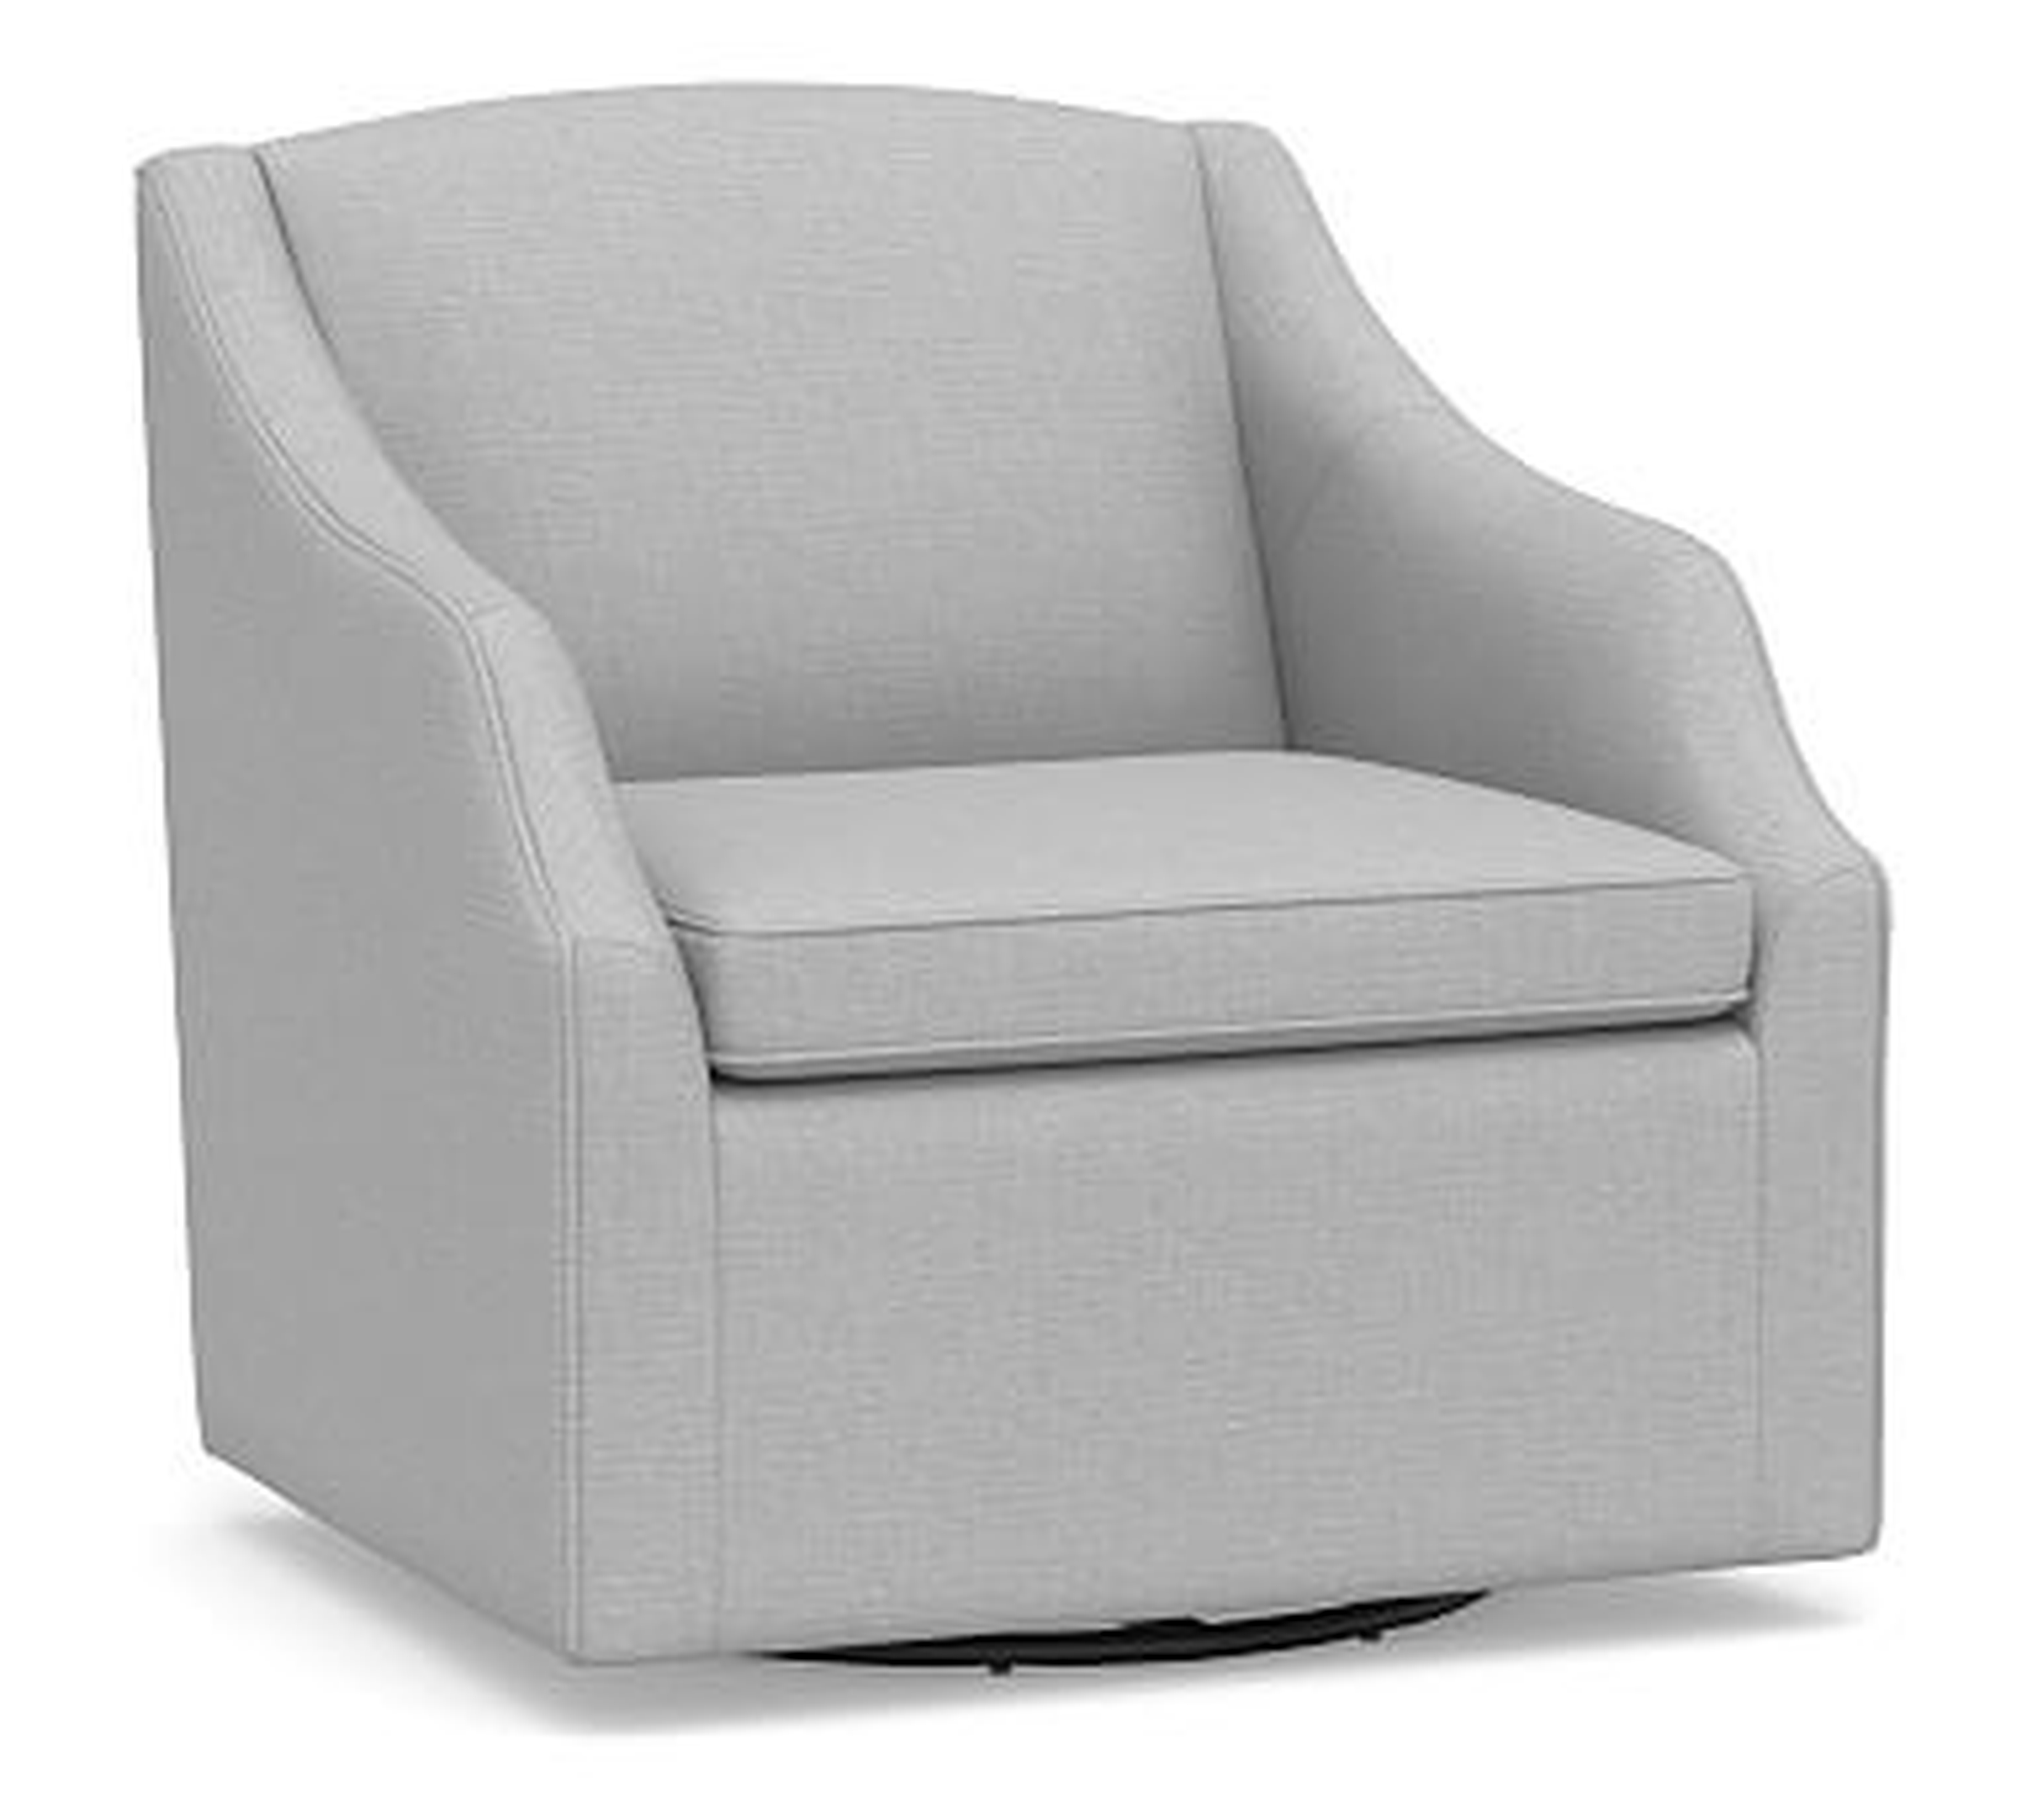 SoMa Emma Upholstered Swivel Armchair, Polyester Wrapped Cushions, Brushed Crossweave Light Gray - Pottery Barn